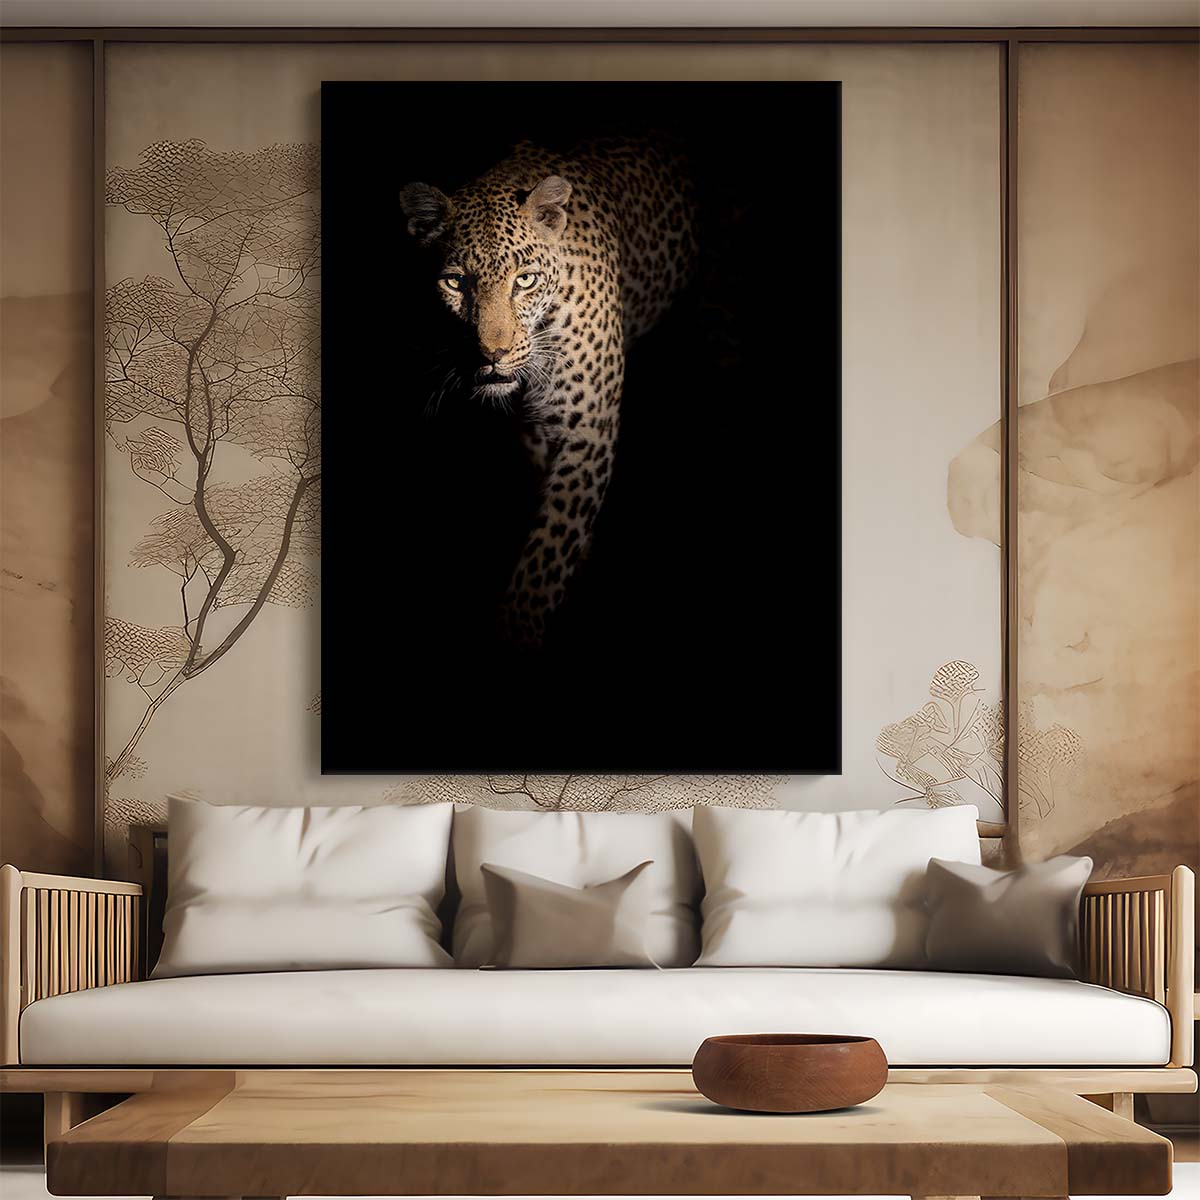 Dark African Leopard Stalking Wildlife Photography Wall Art by Luxuriance Designs, made in USA